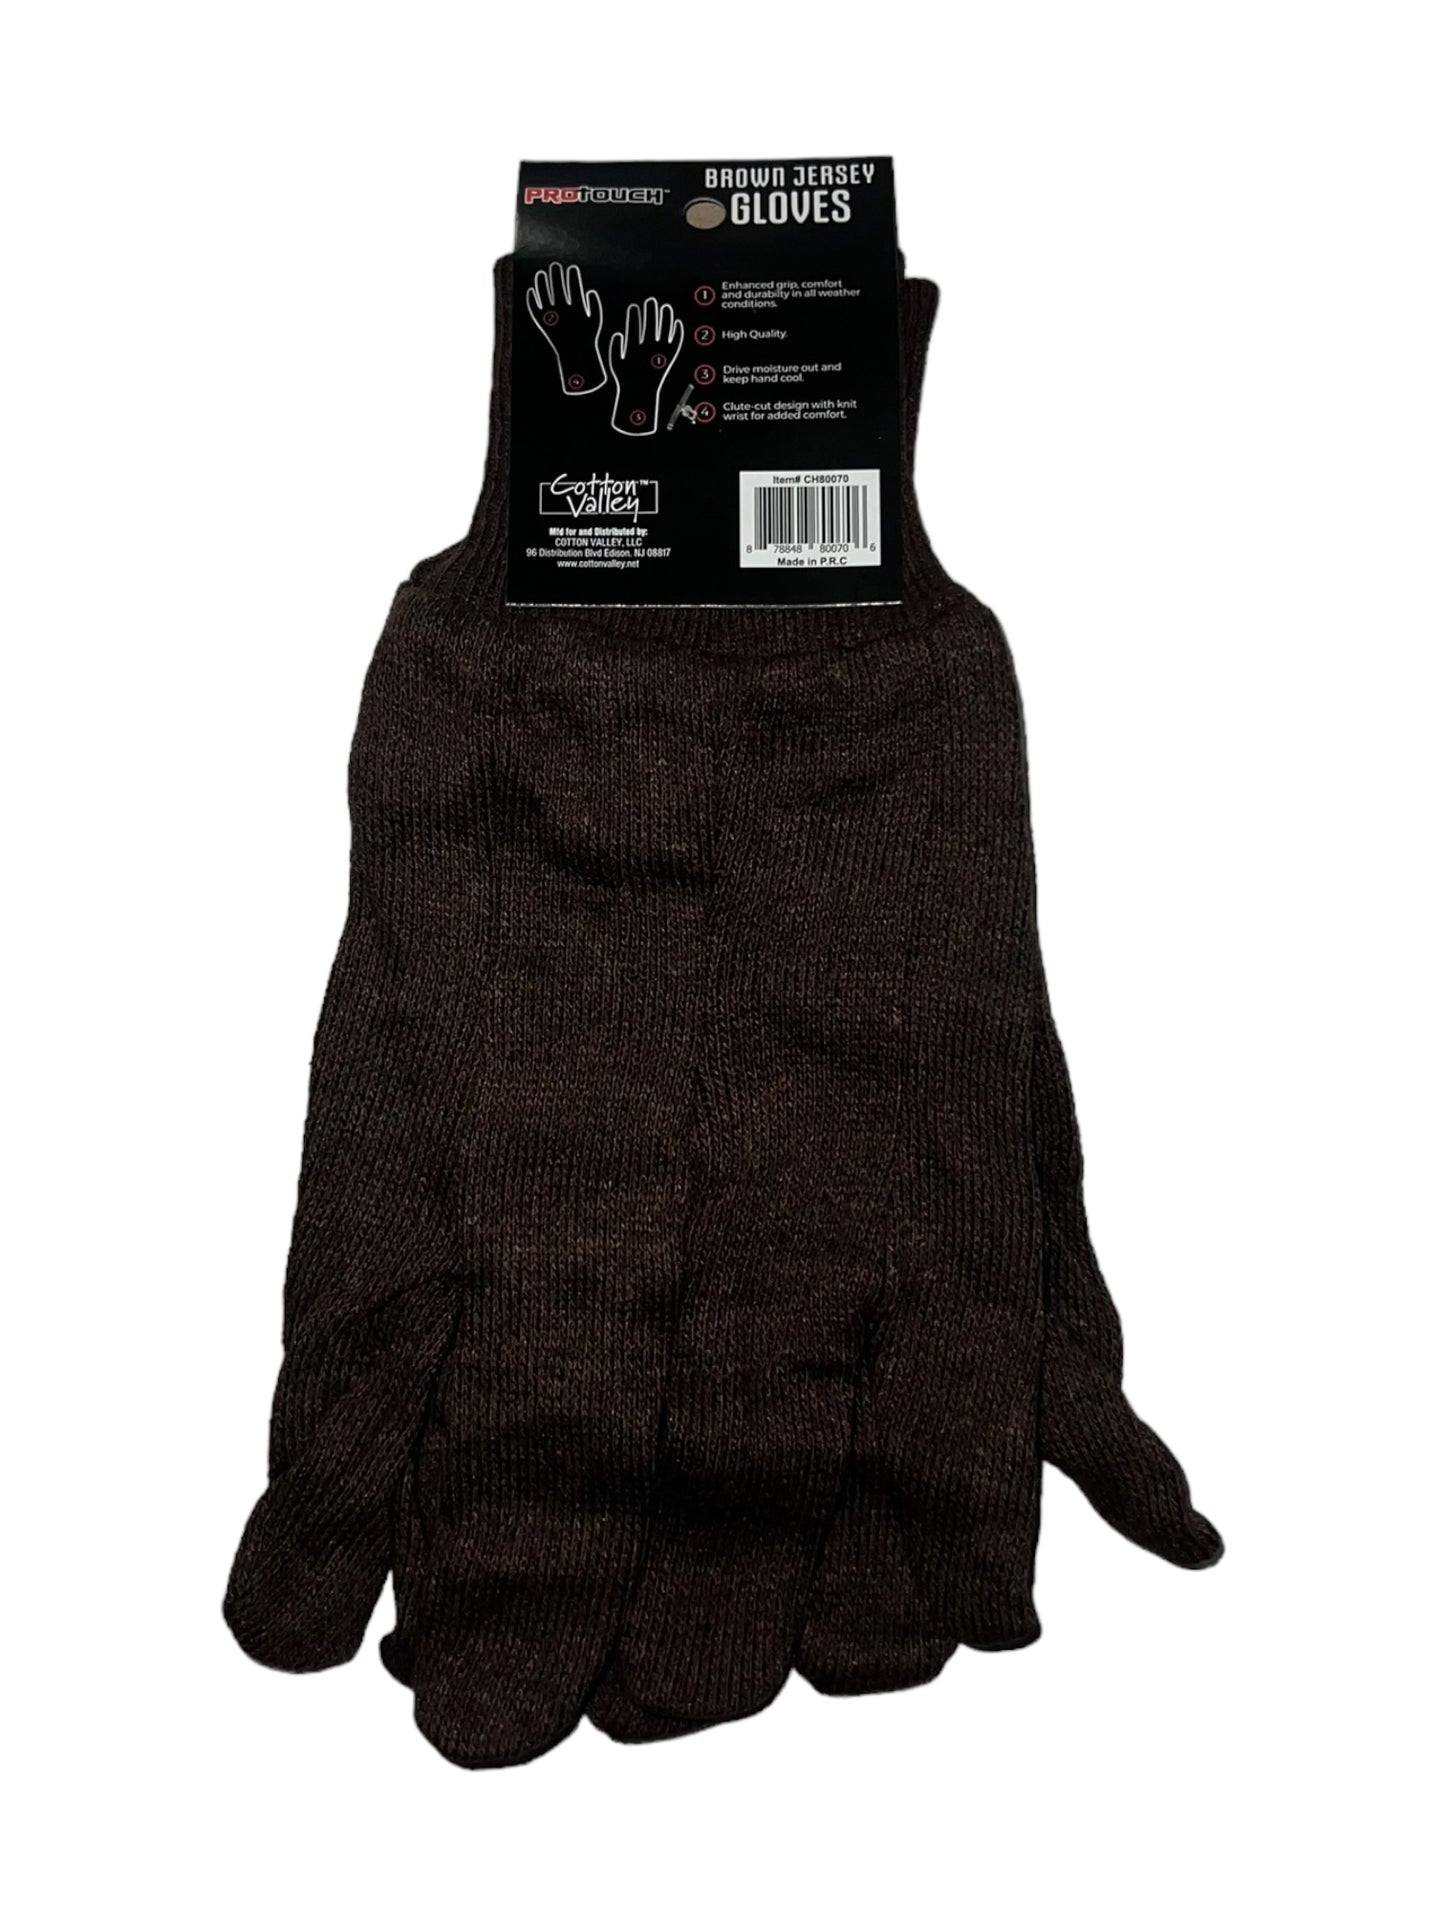 ProTouch Brown Jersey Gloves 12-Pairs